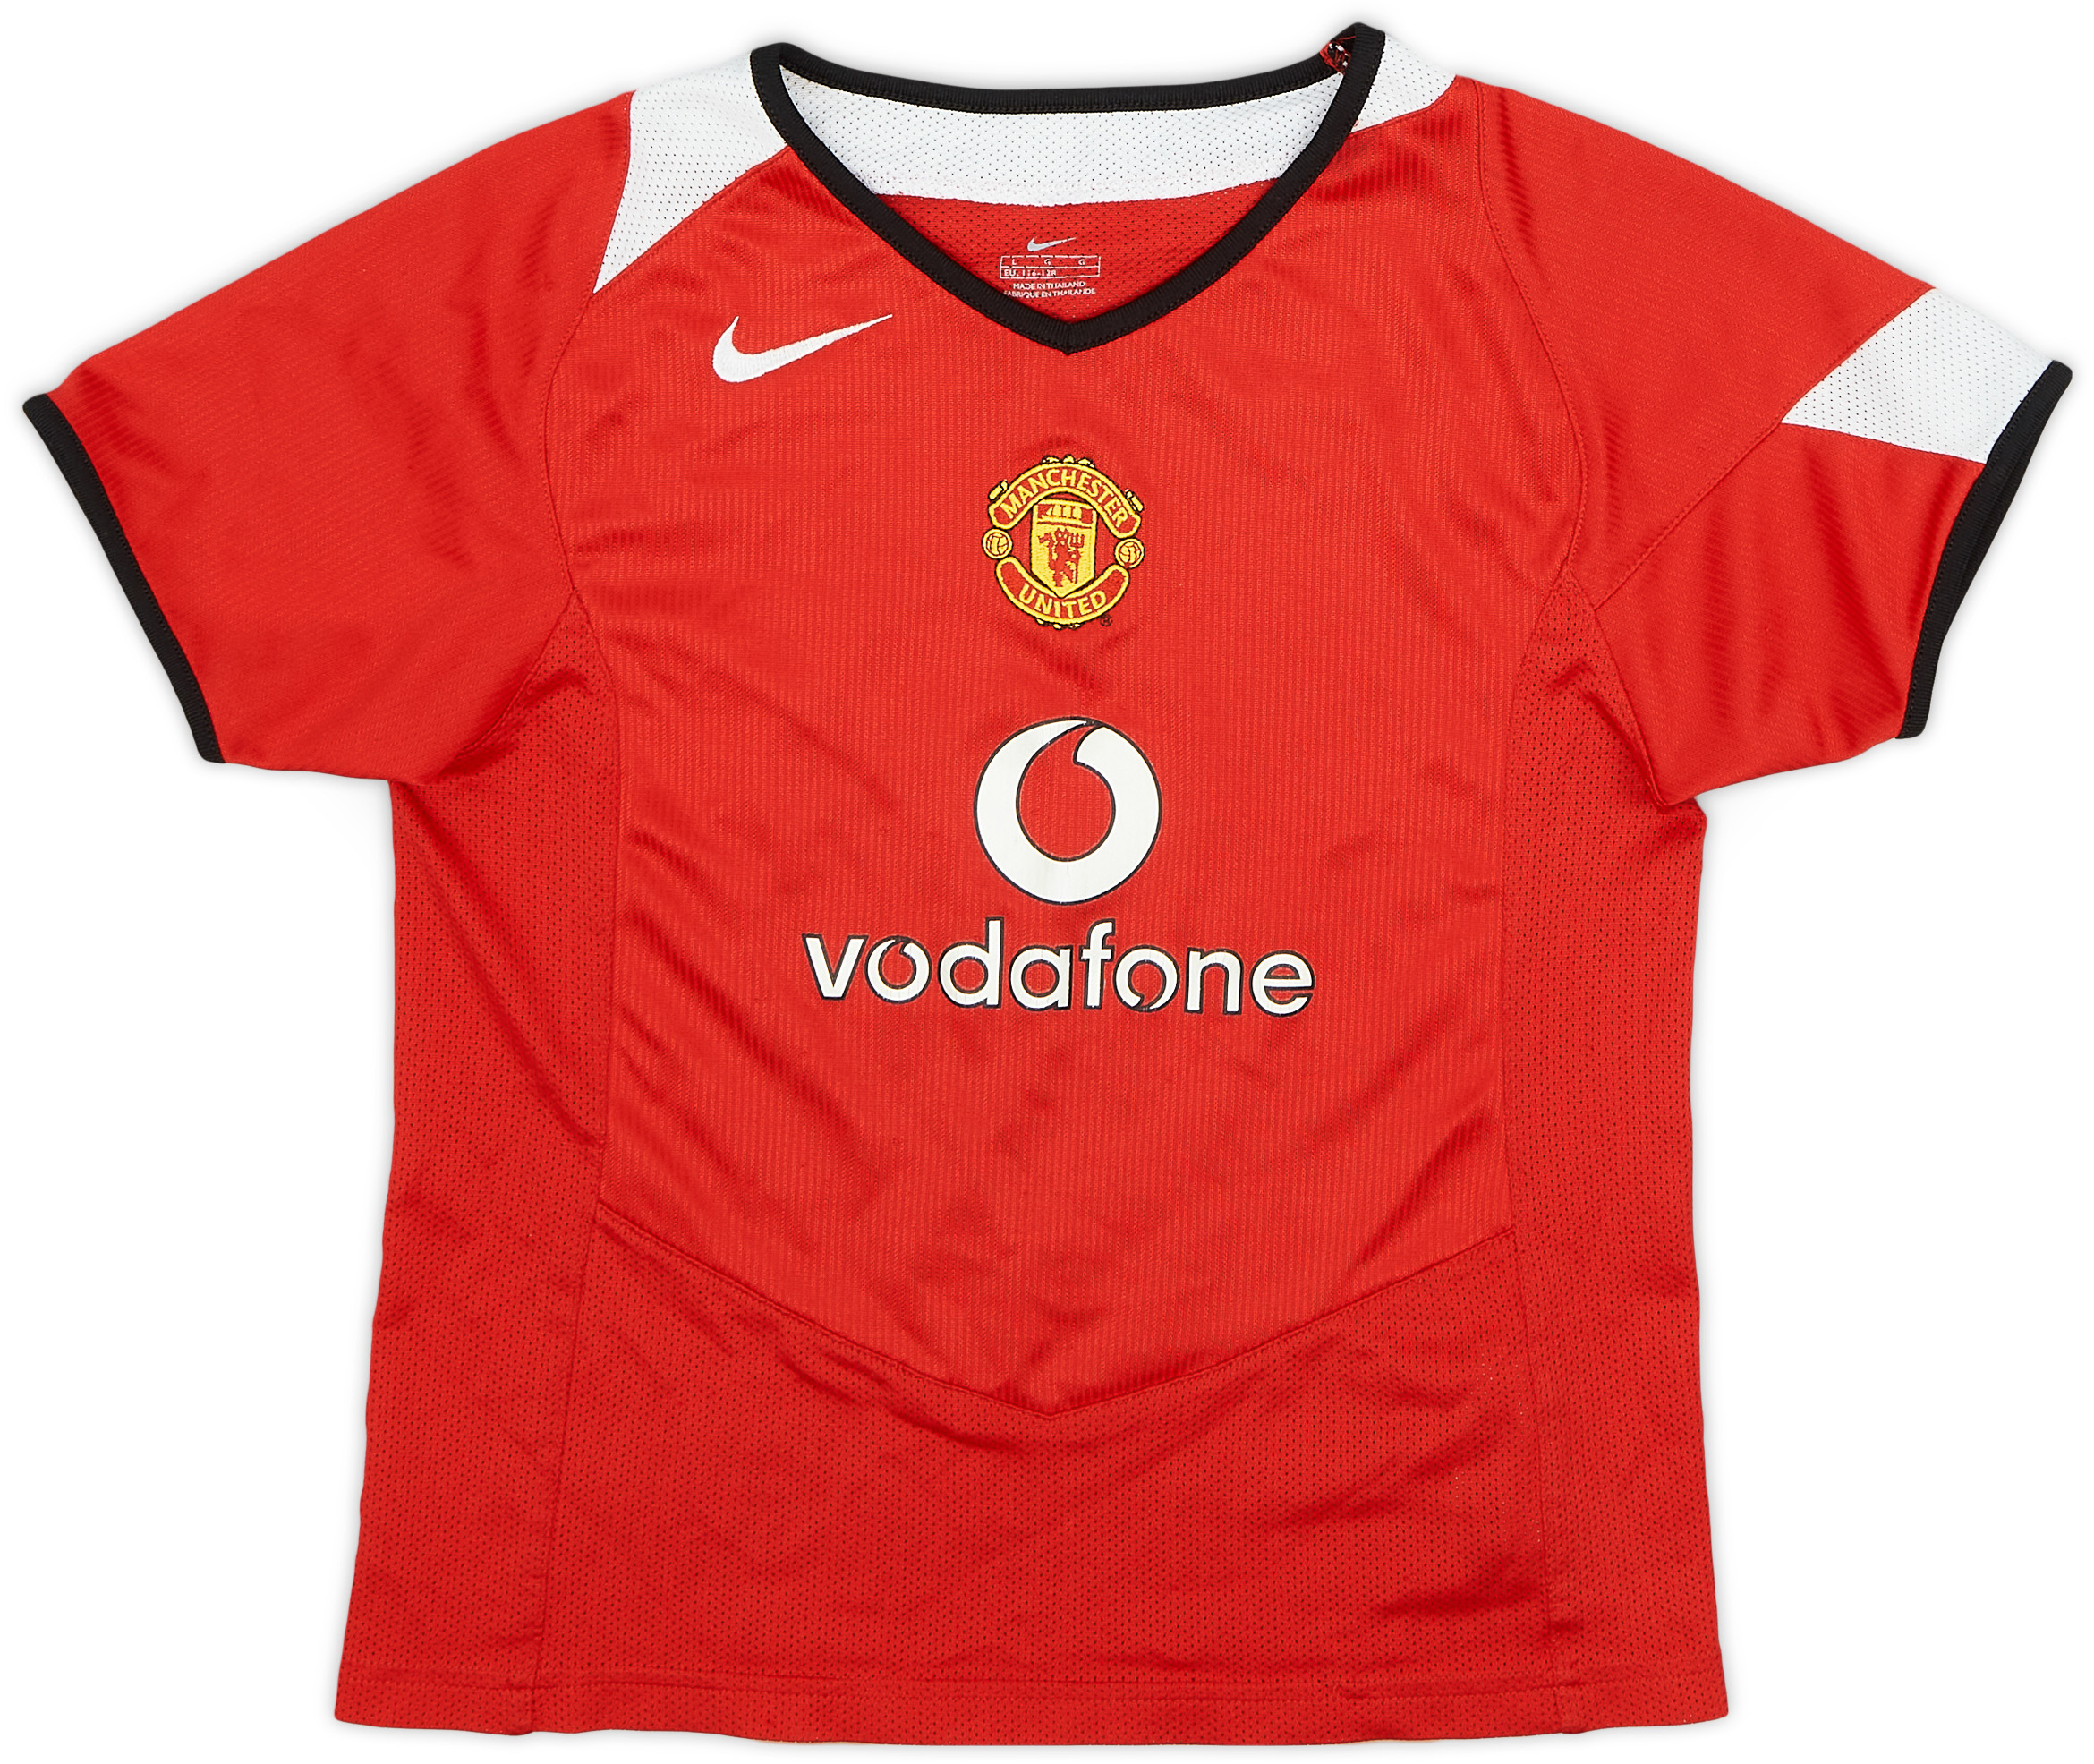 2004-06 Manchester United Home Shirt - 7/10 - (6-7 Years)